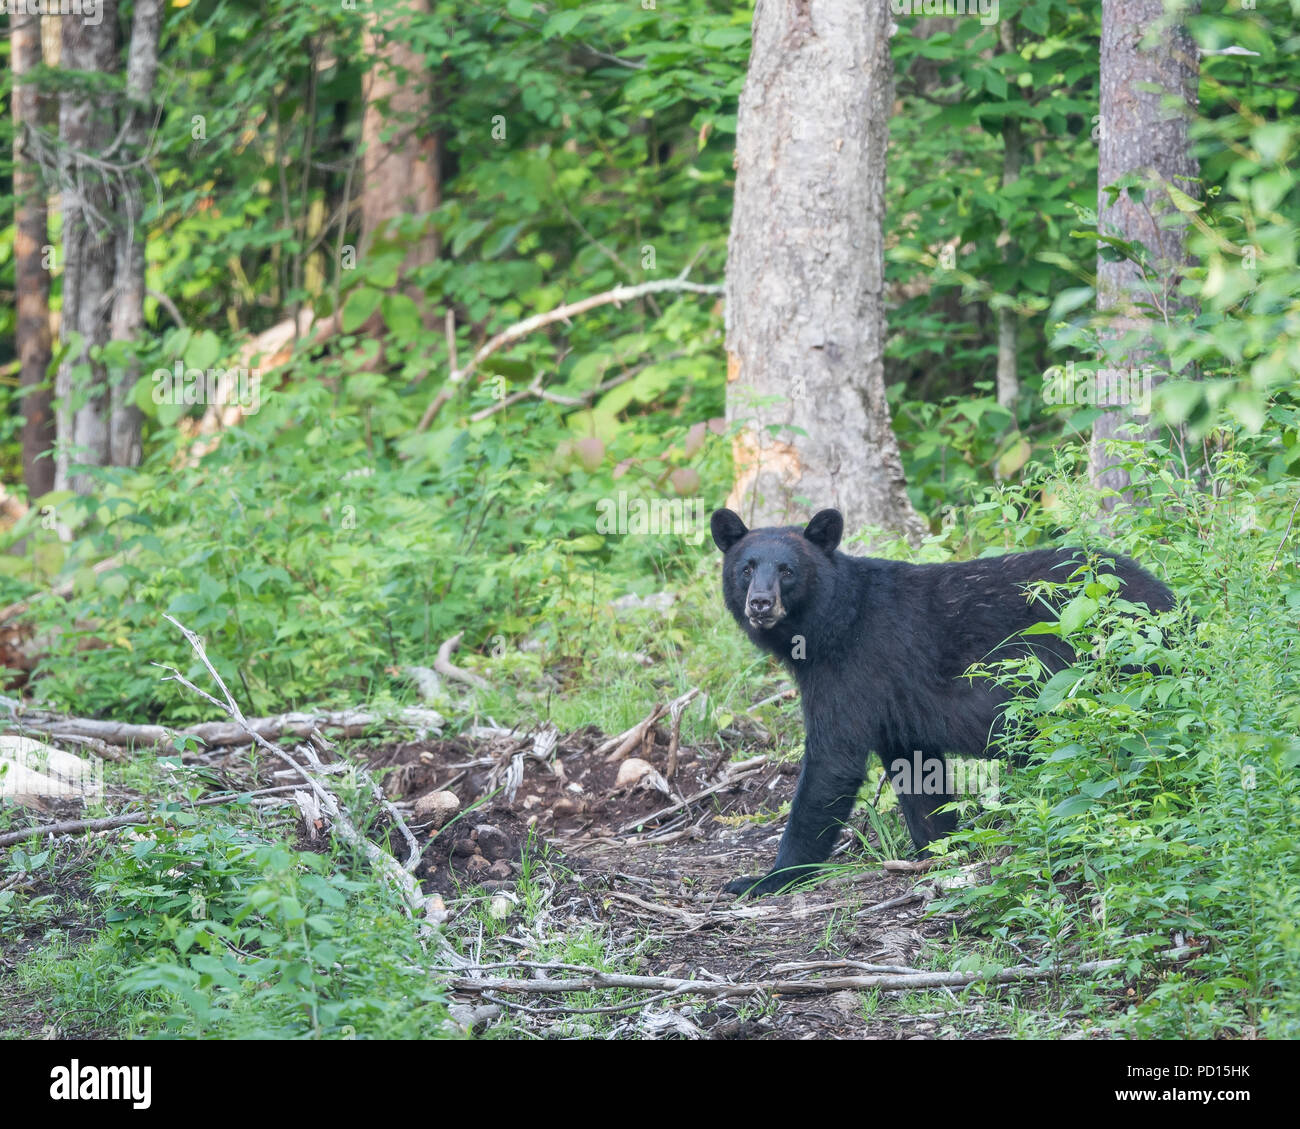 A wild American black bear, Ursus americanus, walking through the forest in the Adirondack Mountains, NY USA on a logging skidder trail. Stock Photo